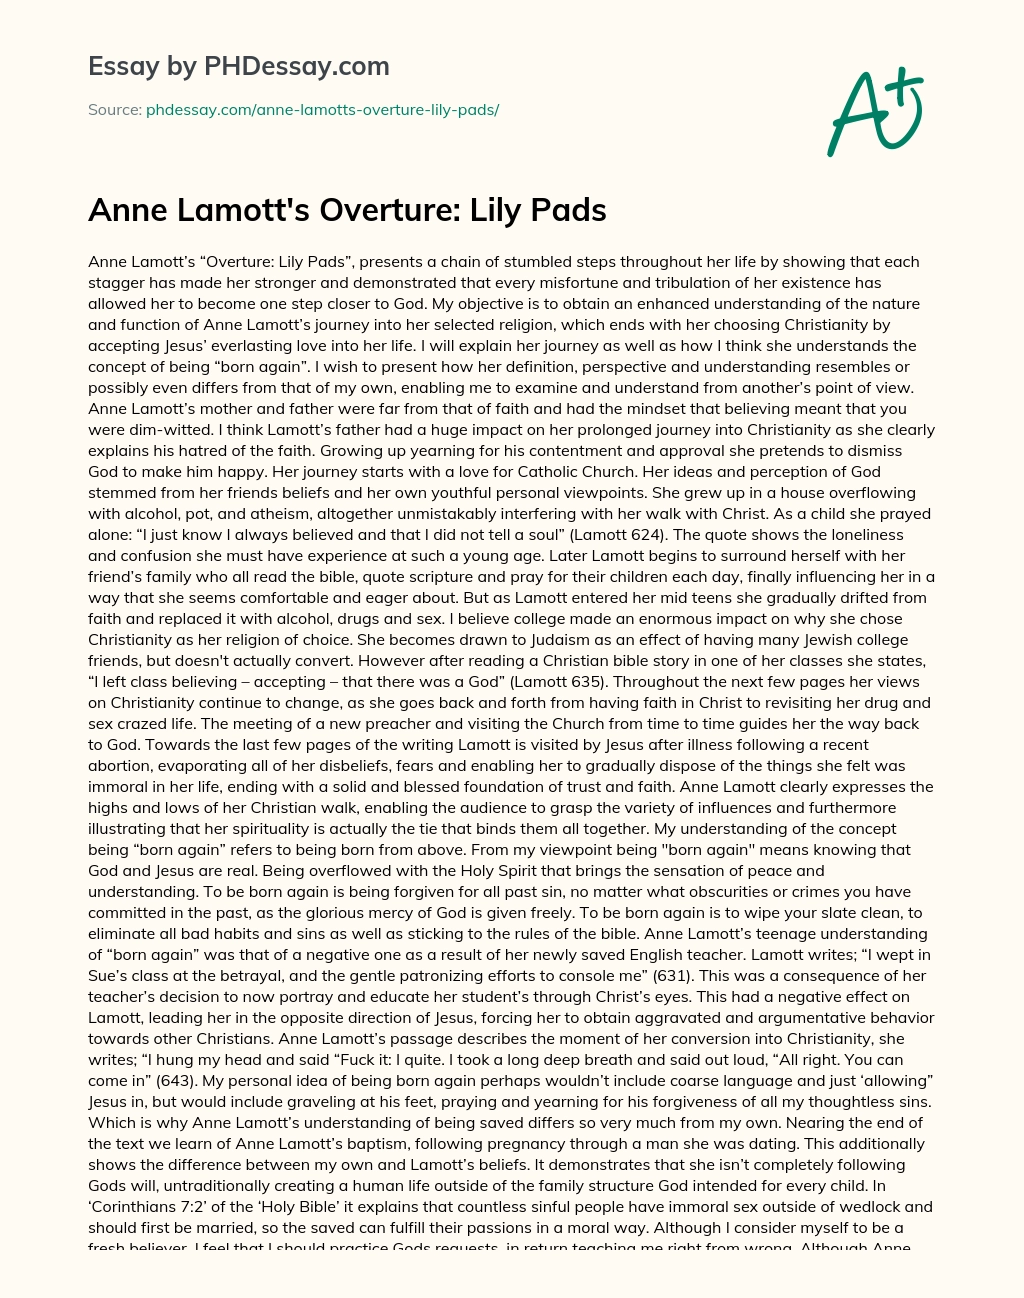 Anne Lamott’s Overture: Lily Pads essay